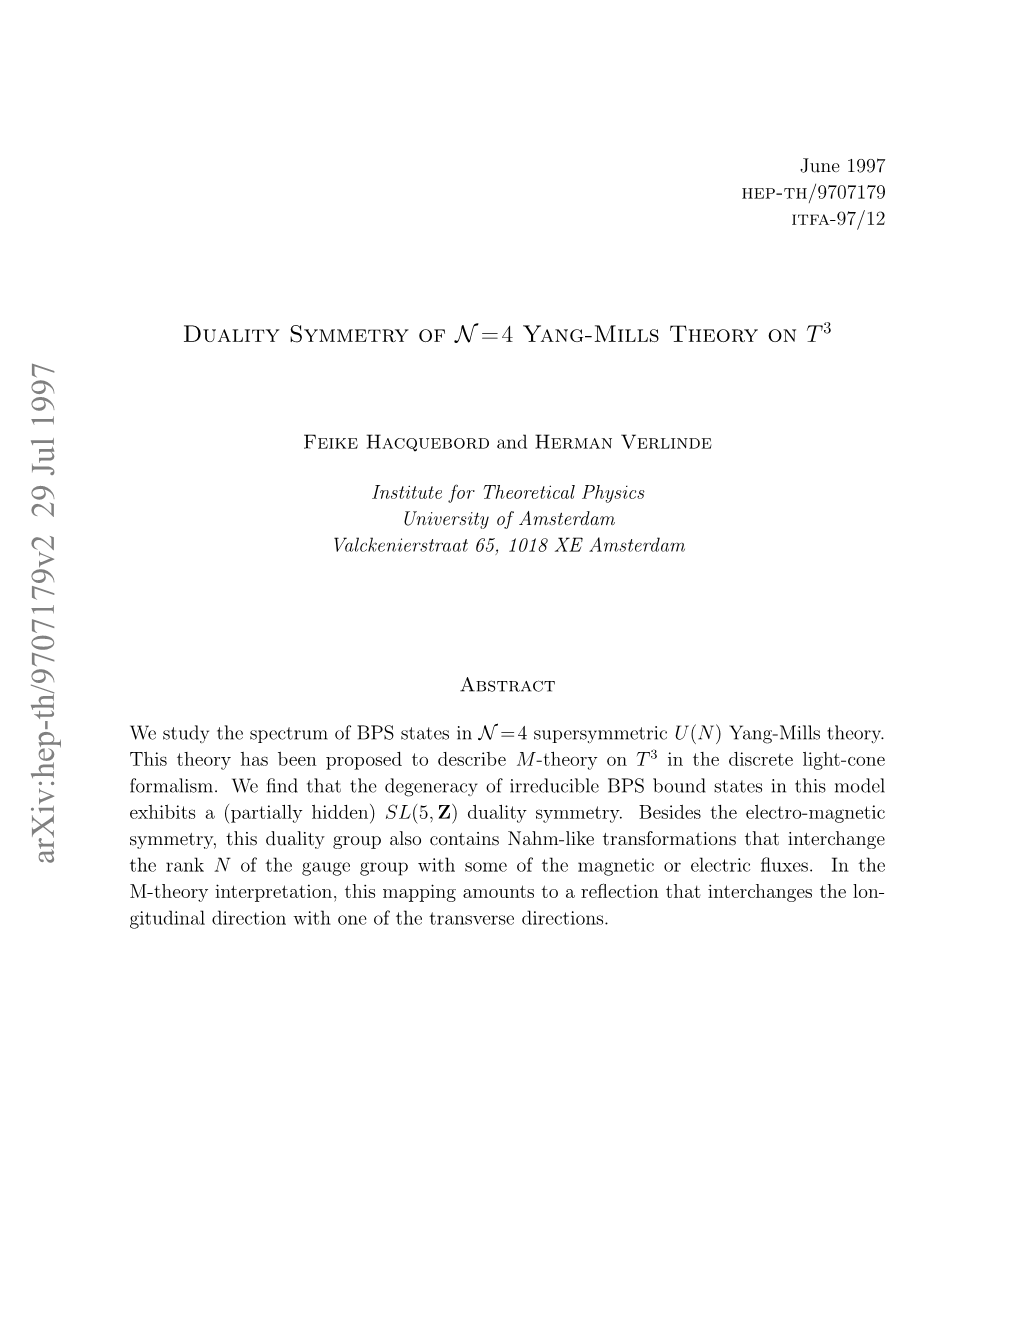 Duality Symmetry of N= 4 Yang-Mills Theory on T^ 3